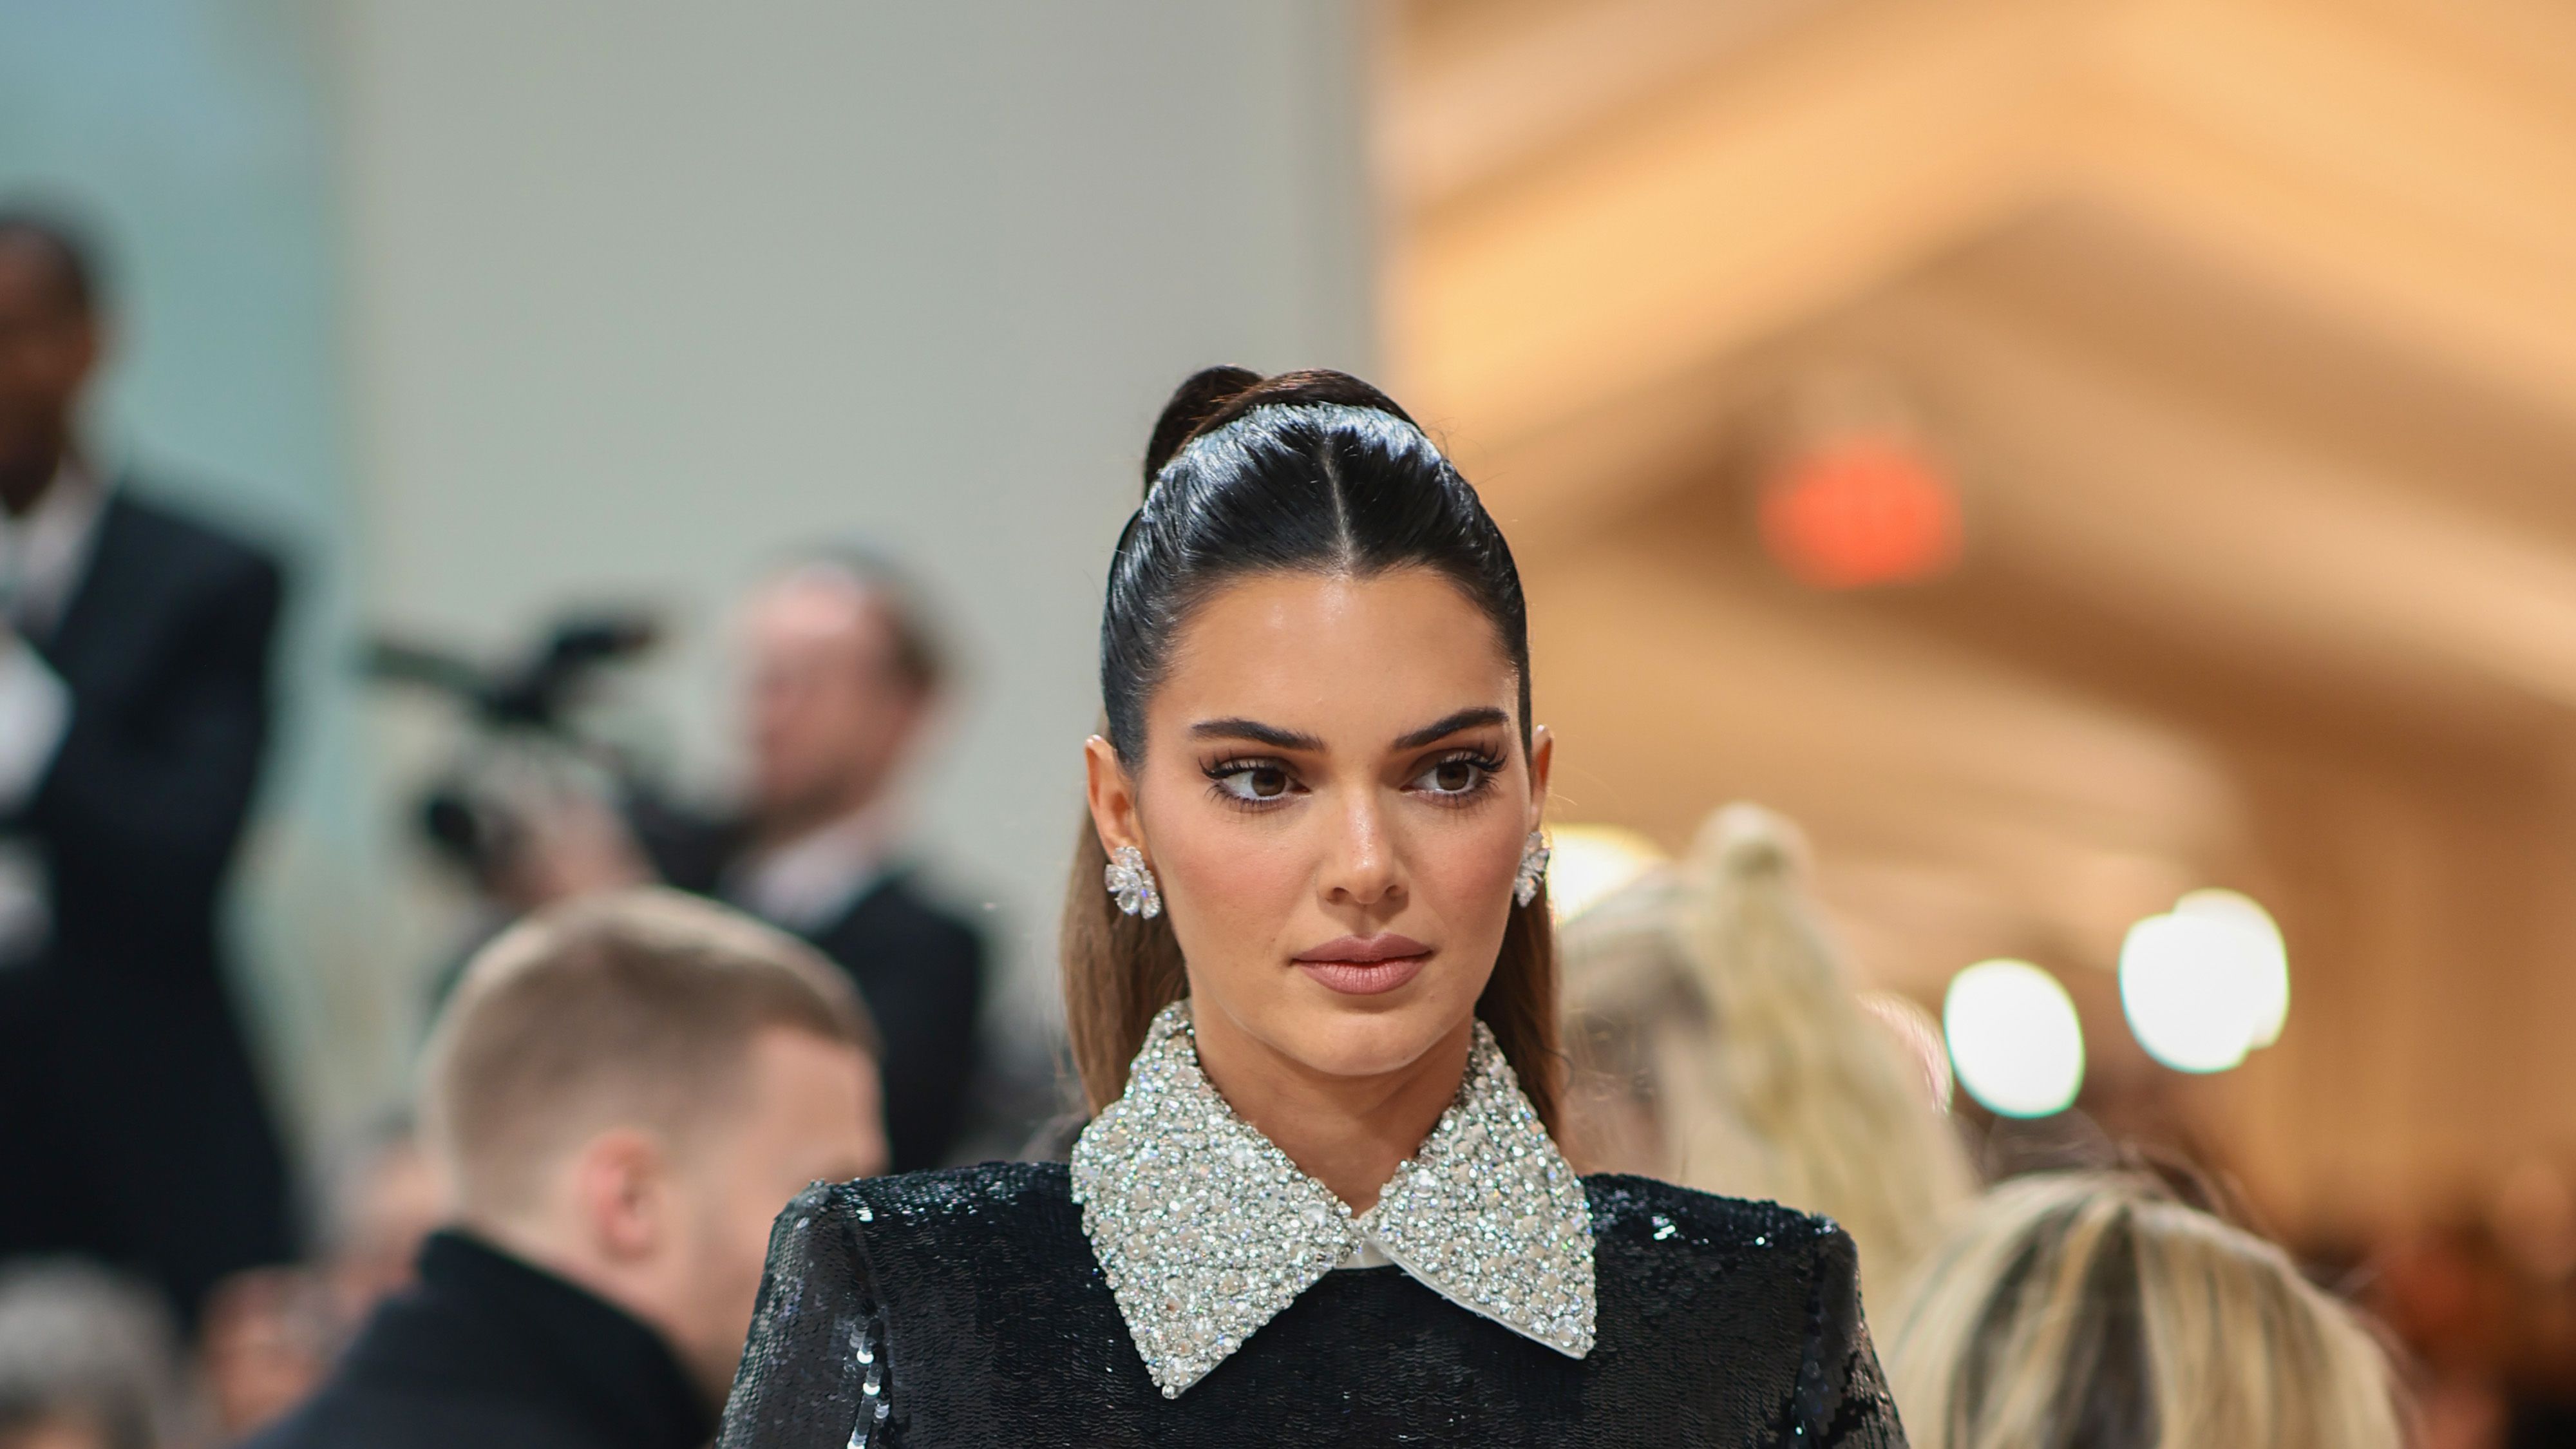 The Kardashians Met Gala 2022 Lookbook & All Their Outfit Details